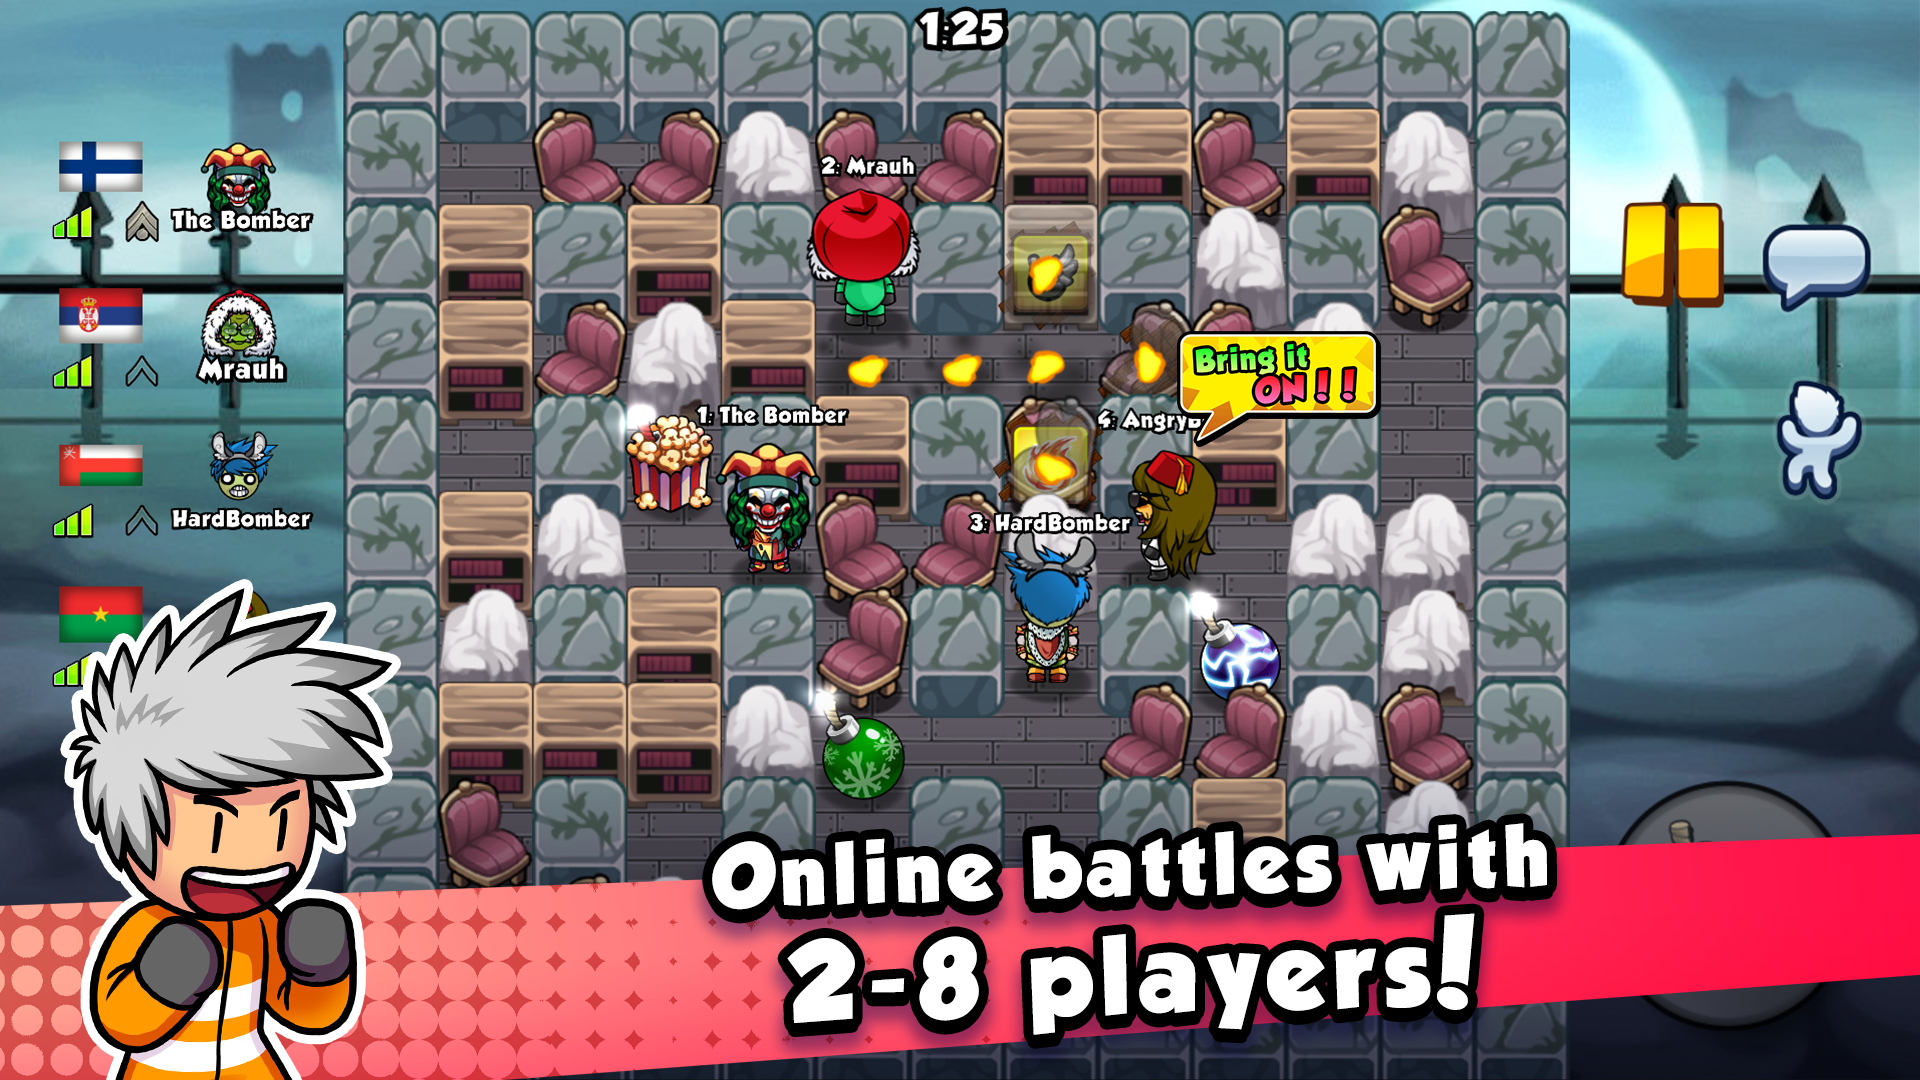 Bomber Friends - Download do APK para Android